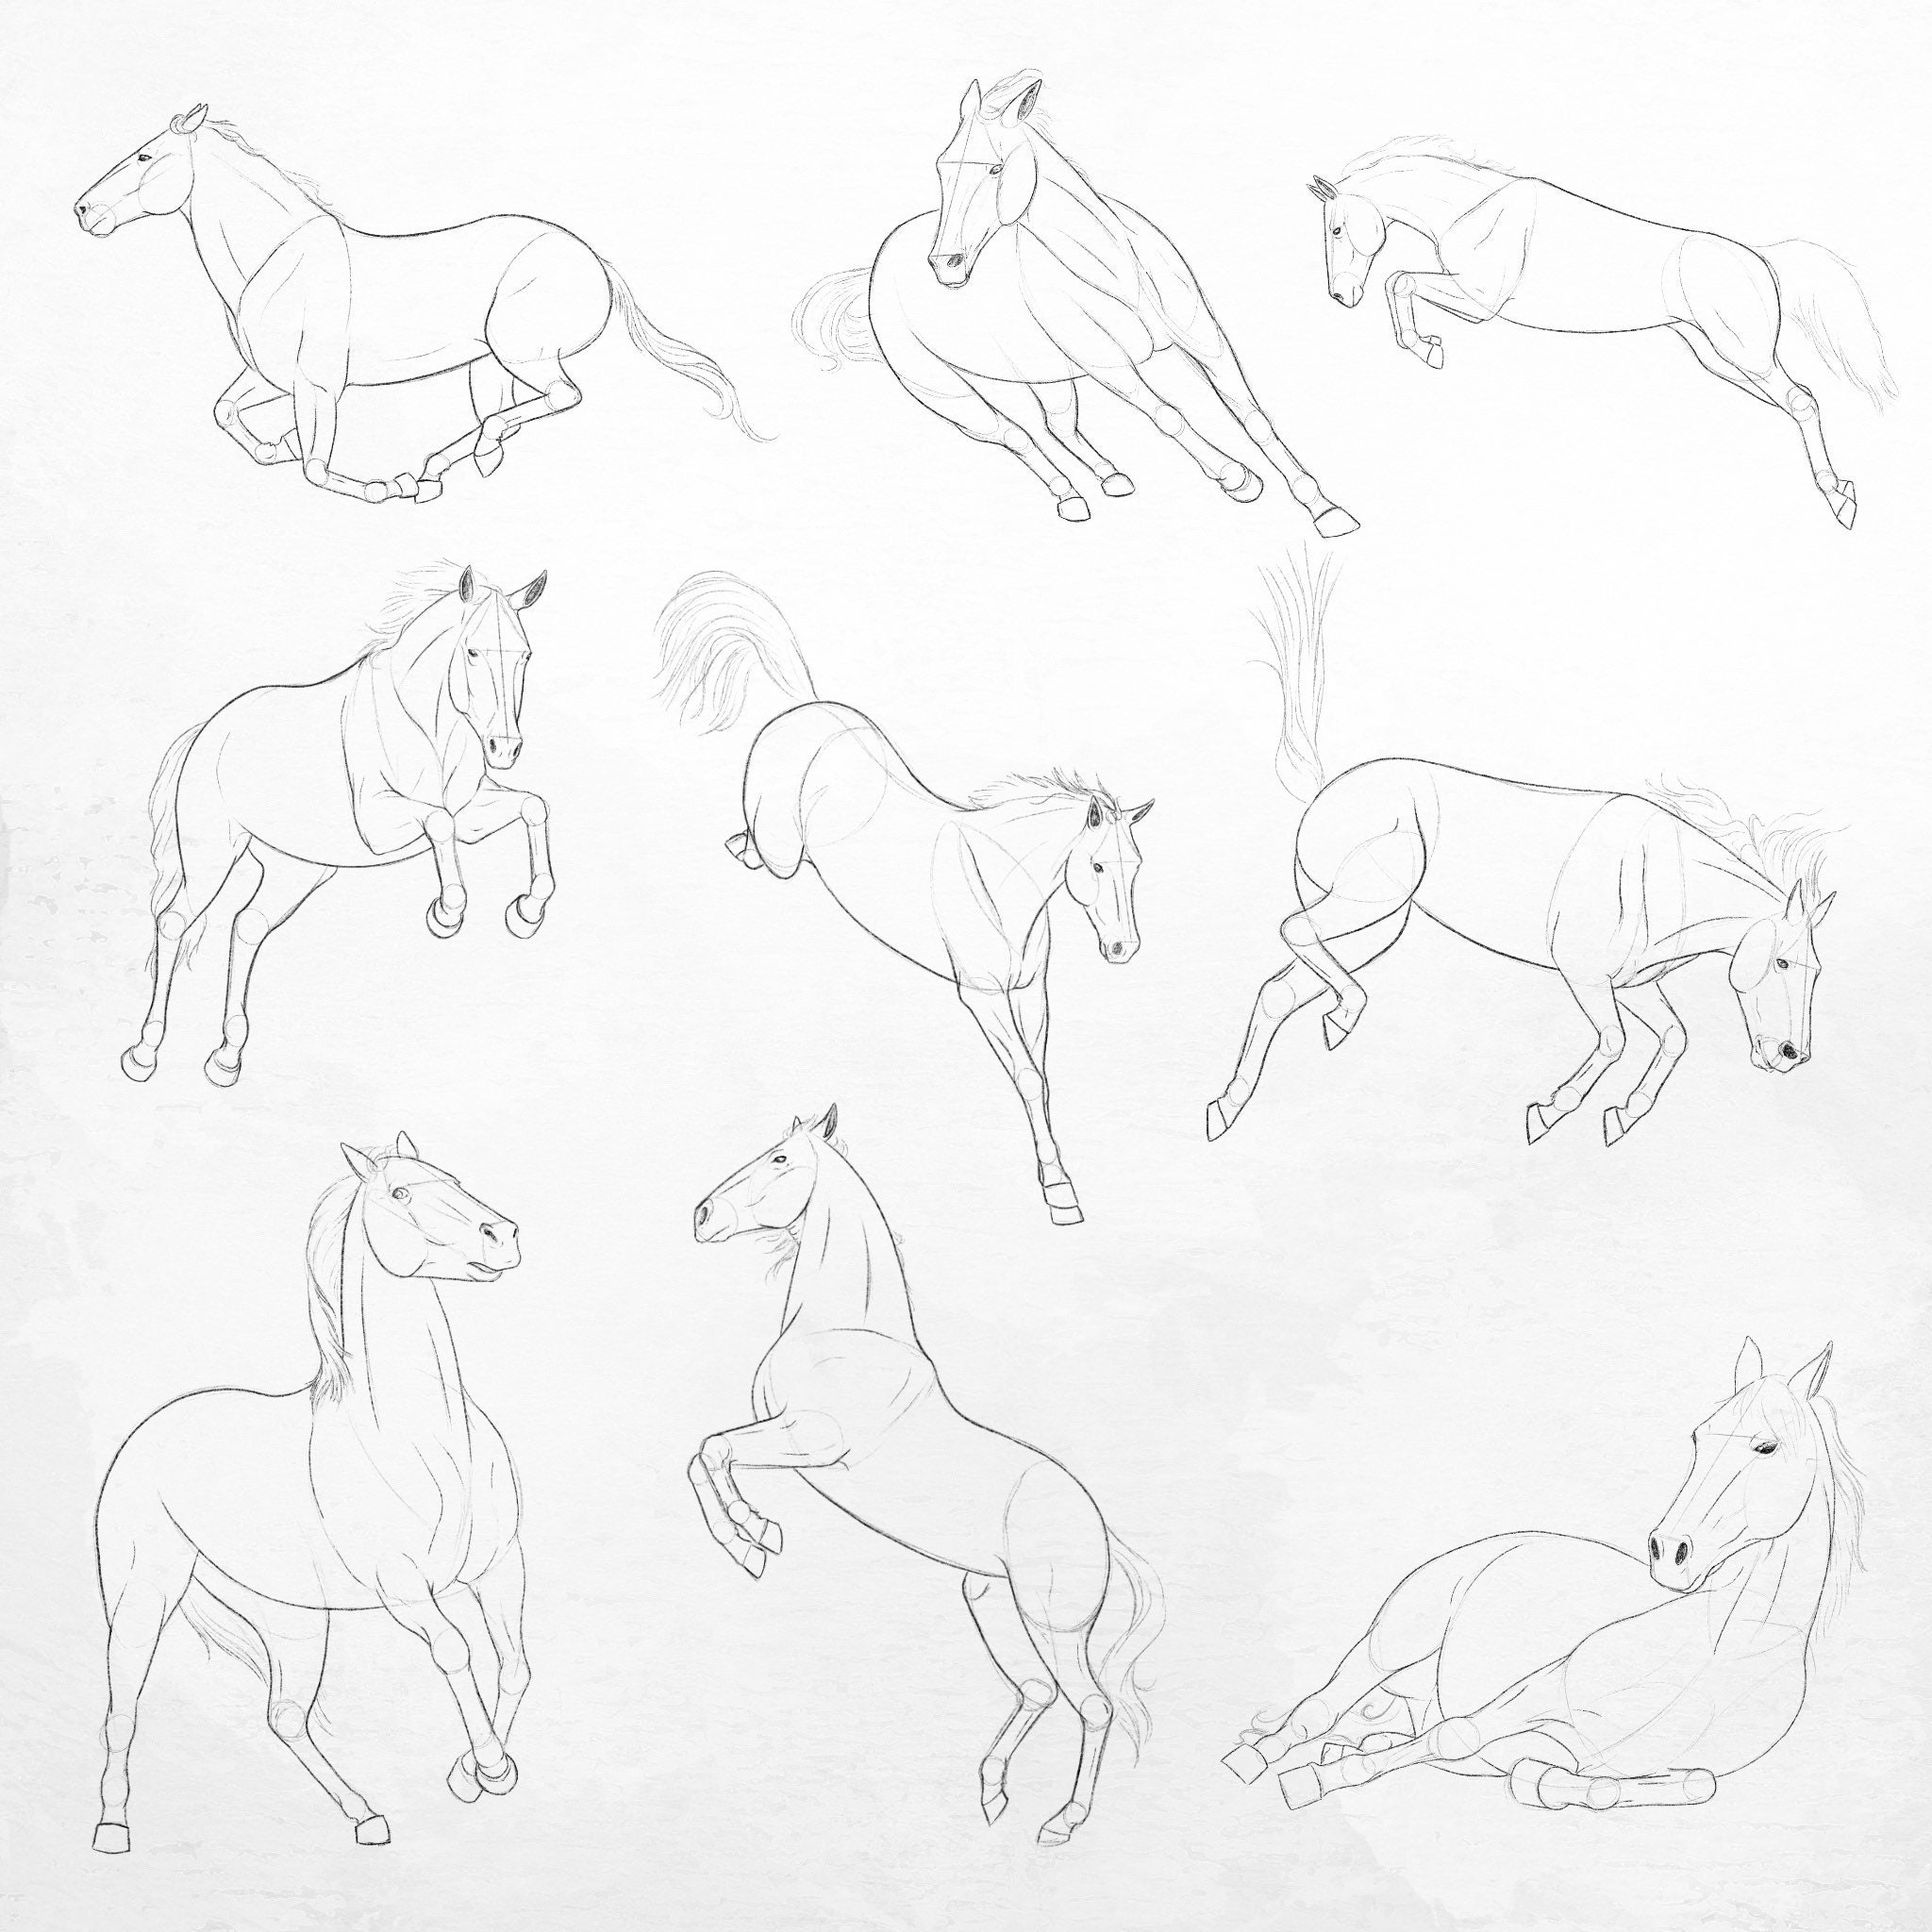 Horse Pose Poses Sketch Drawing Simply Stock Illustration 2187864305 |  Shutterstock